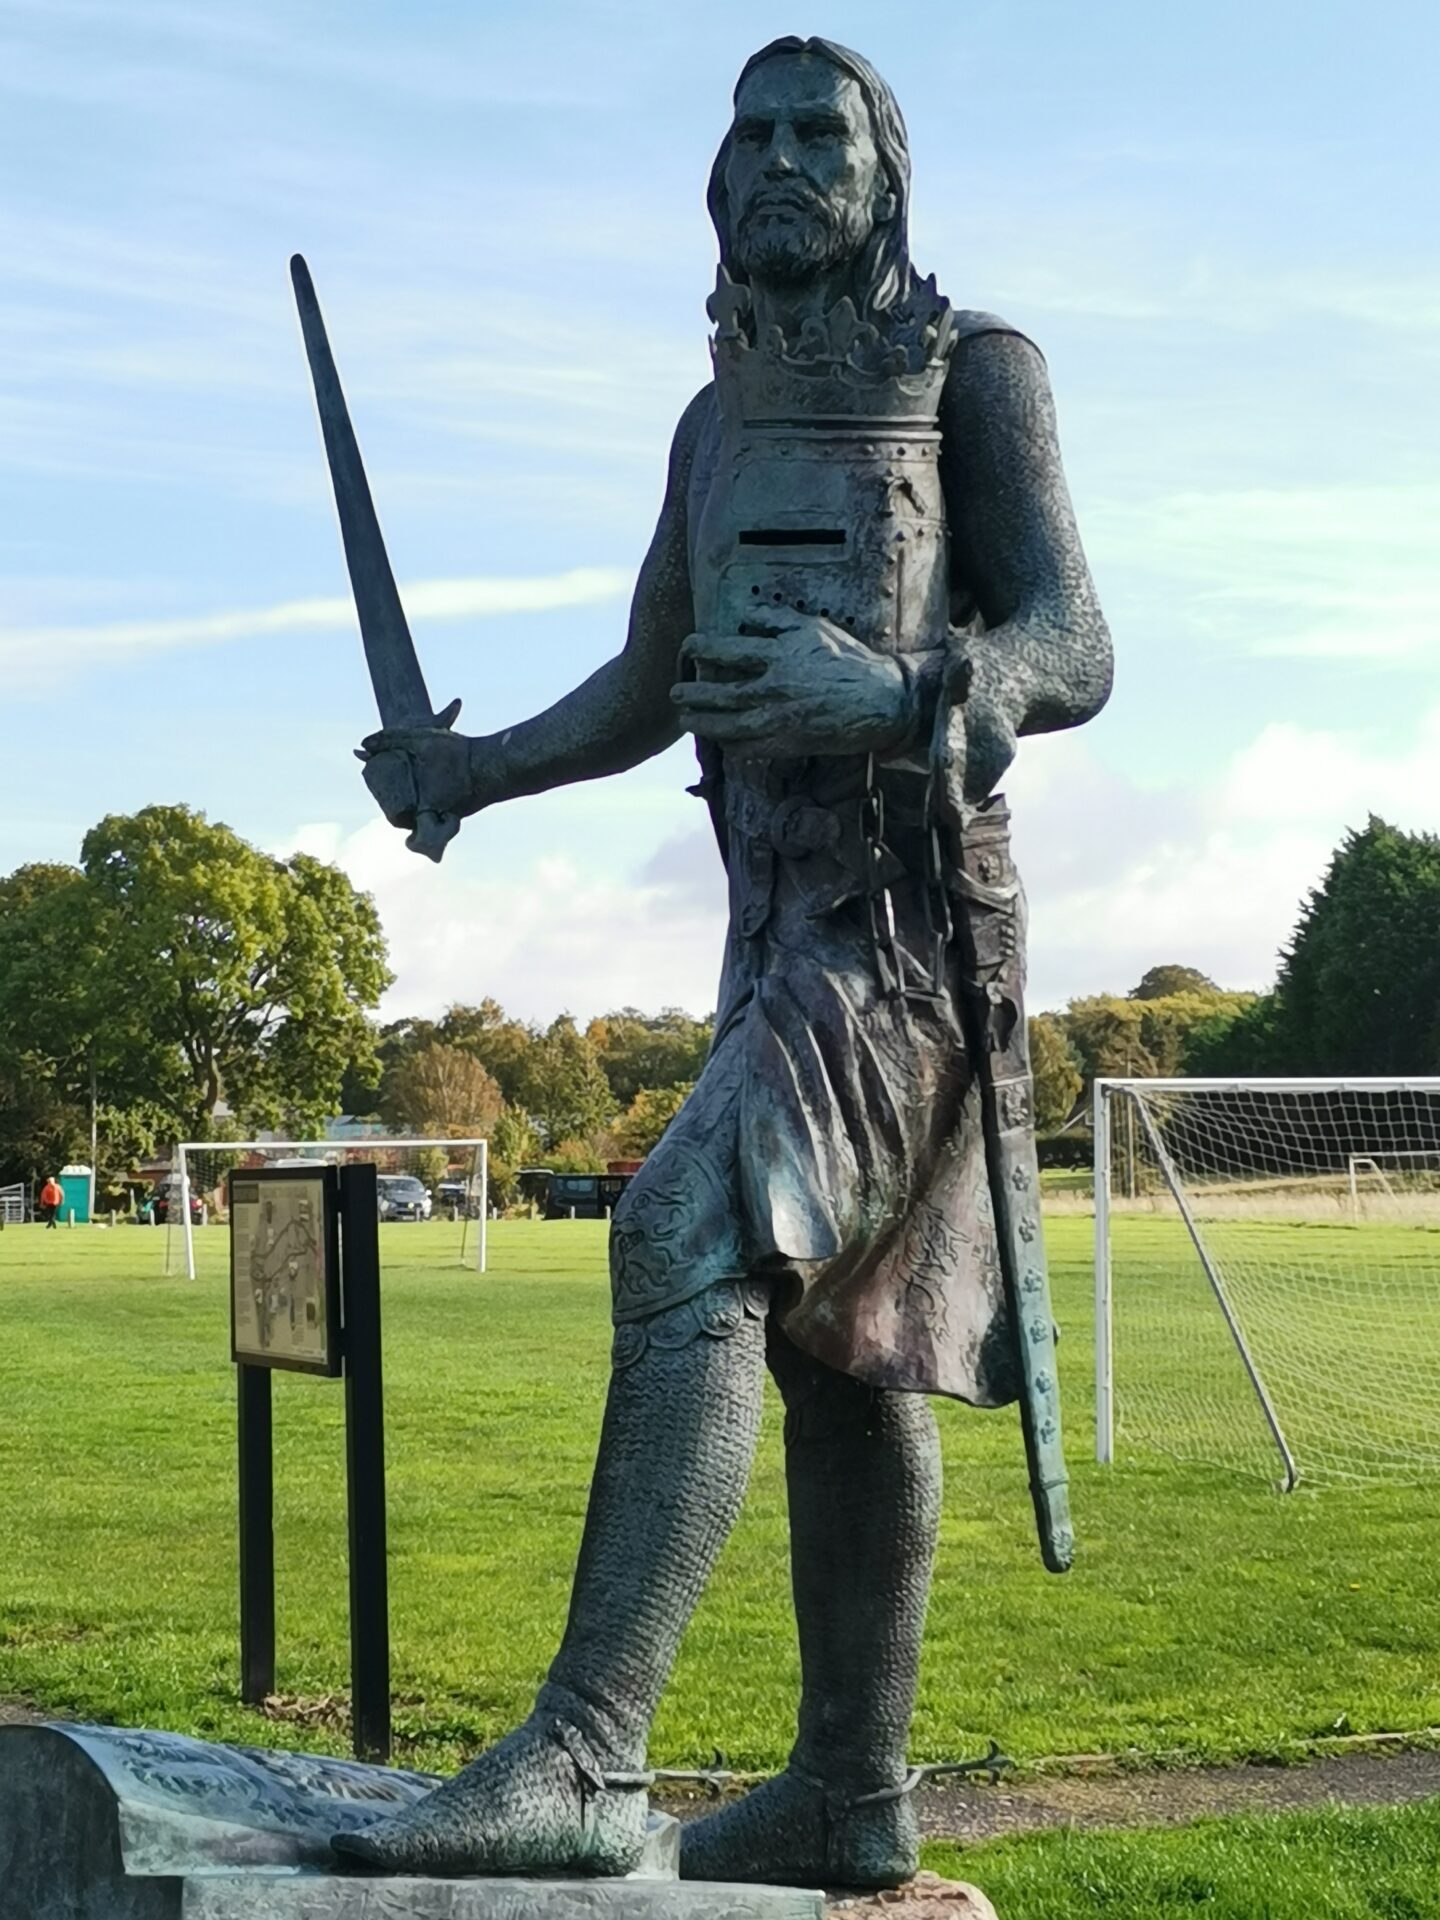 A statue of a medieval king in chain mail stands at the side of a village football ground.